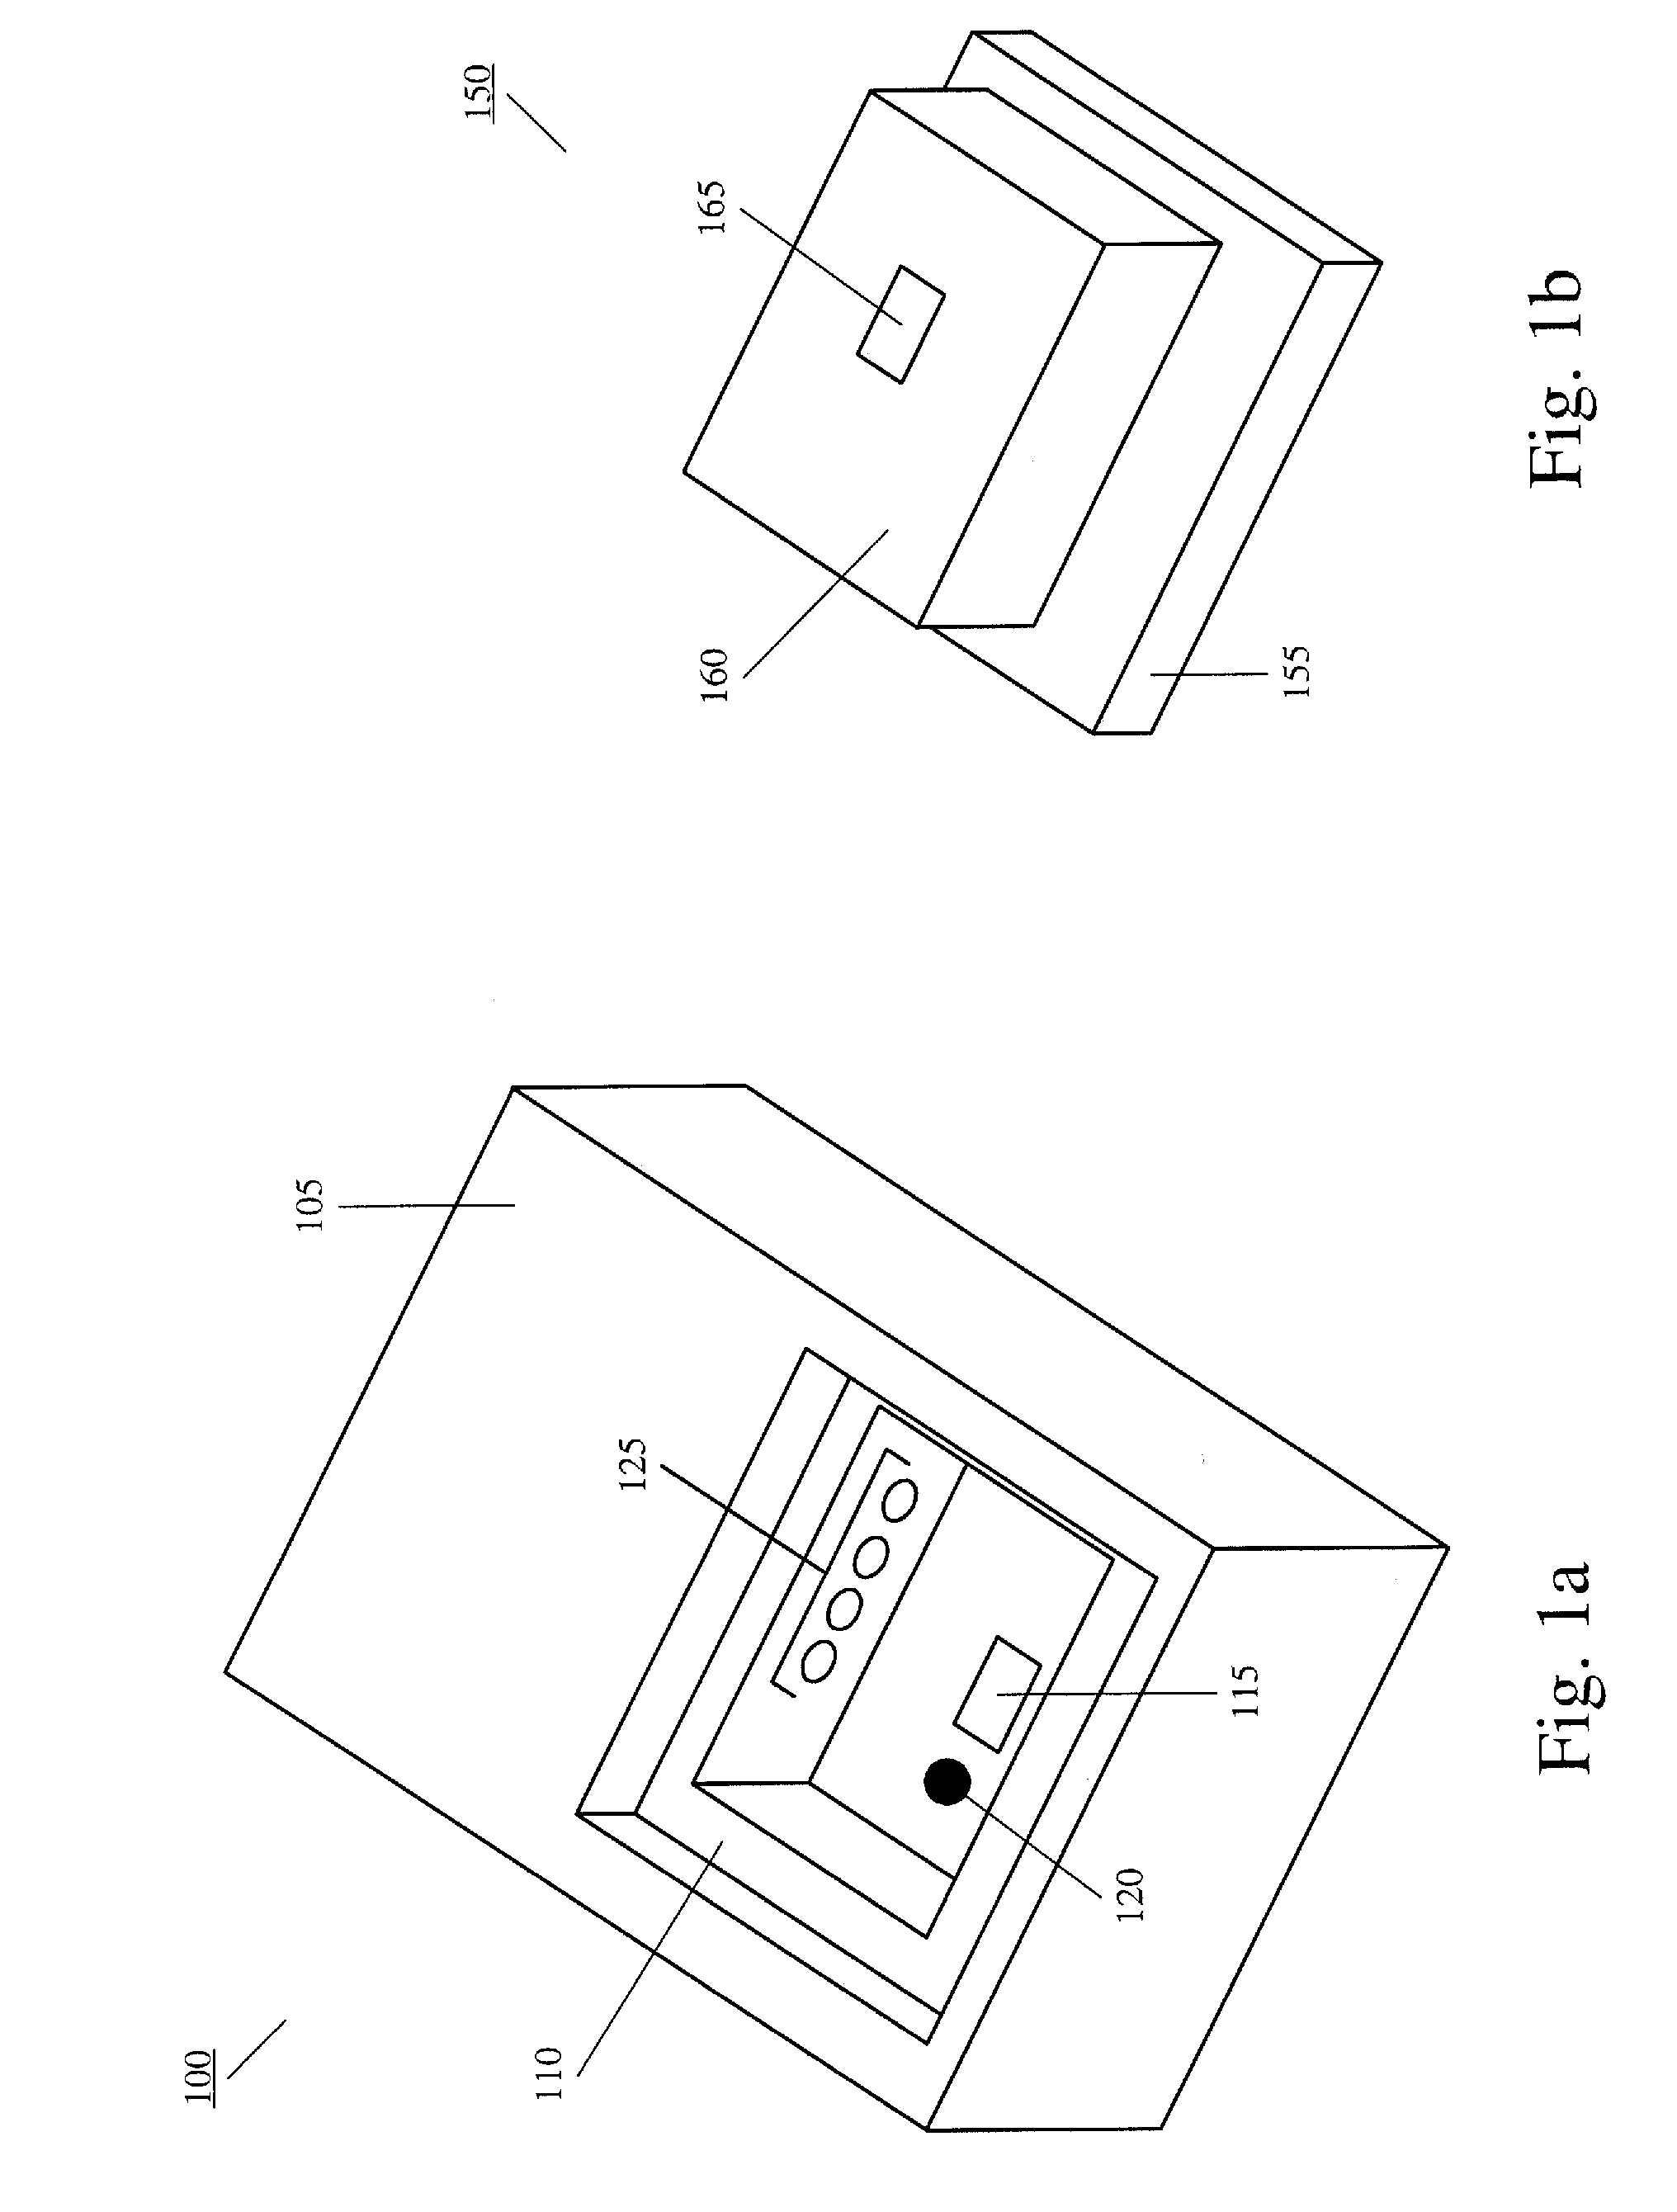 System and Method for an Automated Battery Arrangement